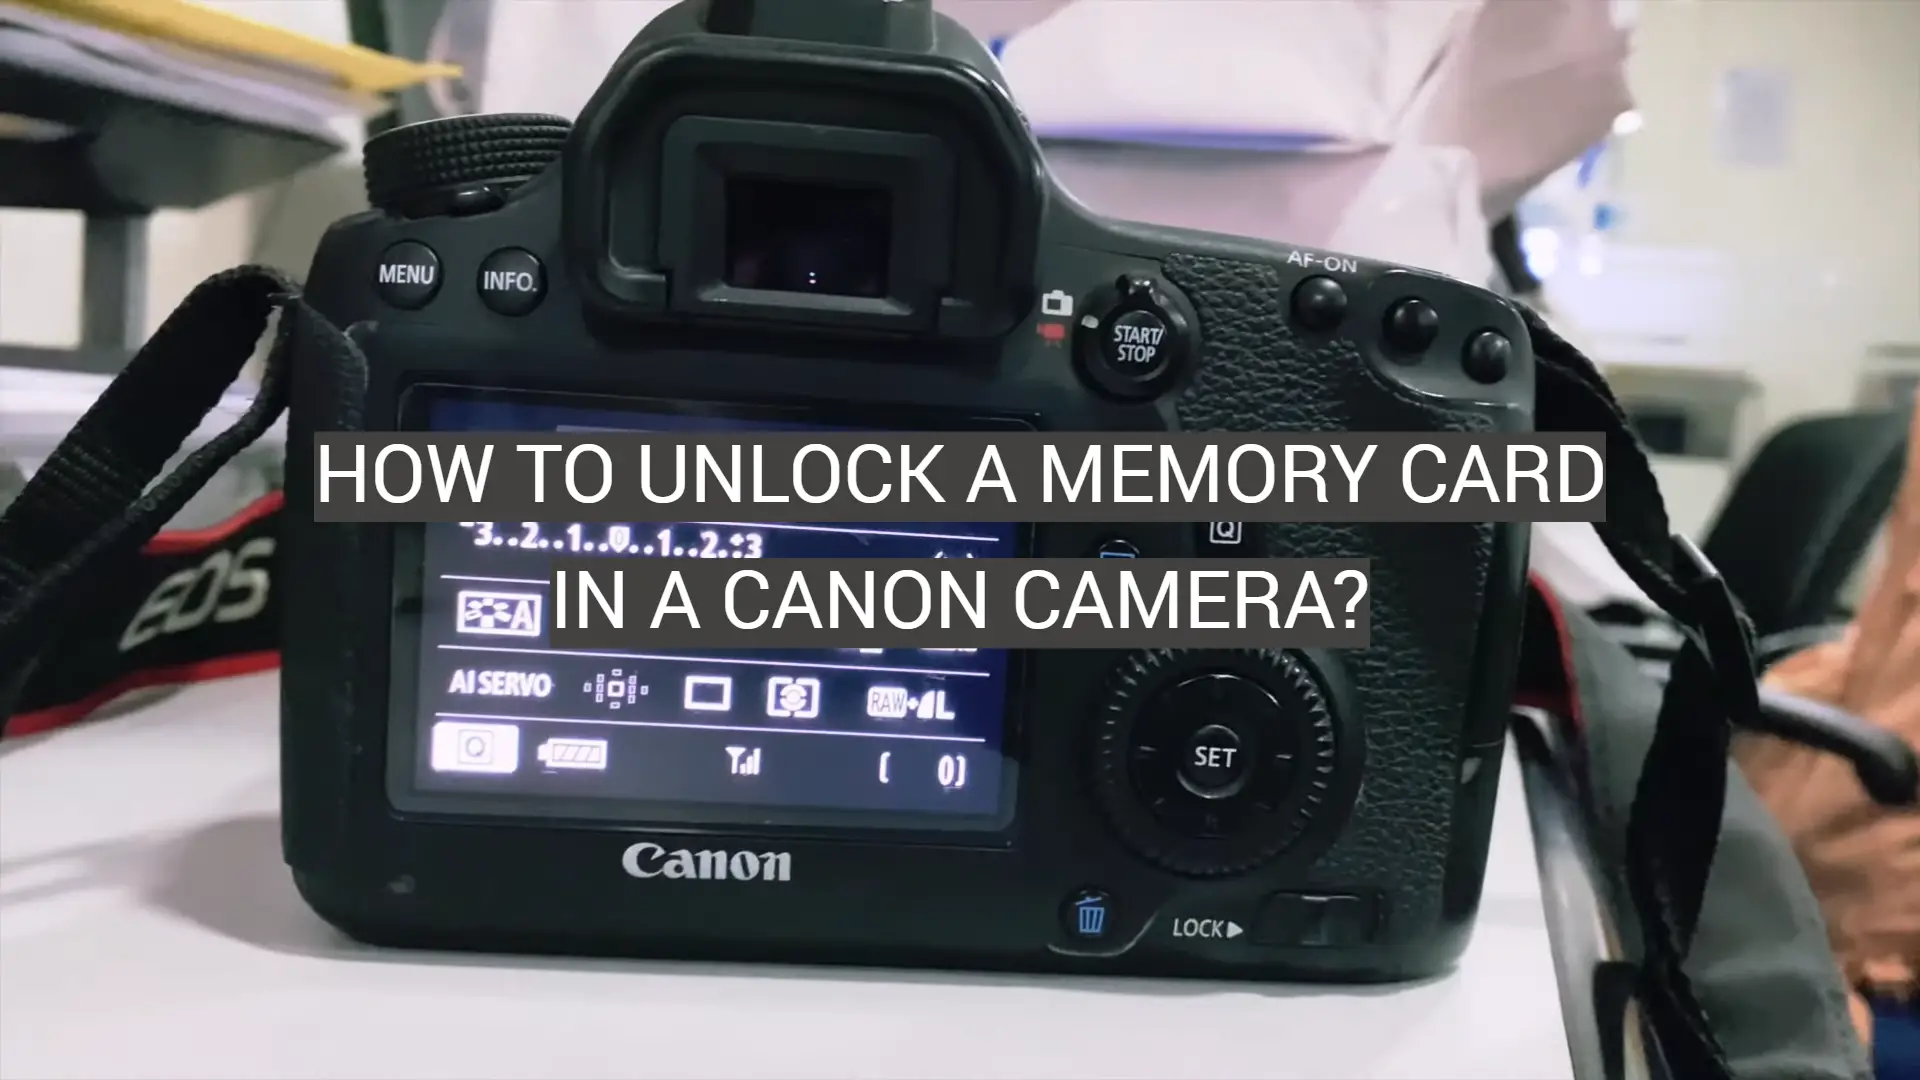 How to Unlock a Memory Card in a Canon Camera?